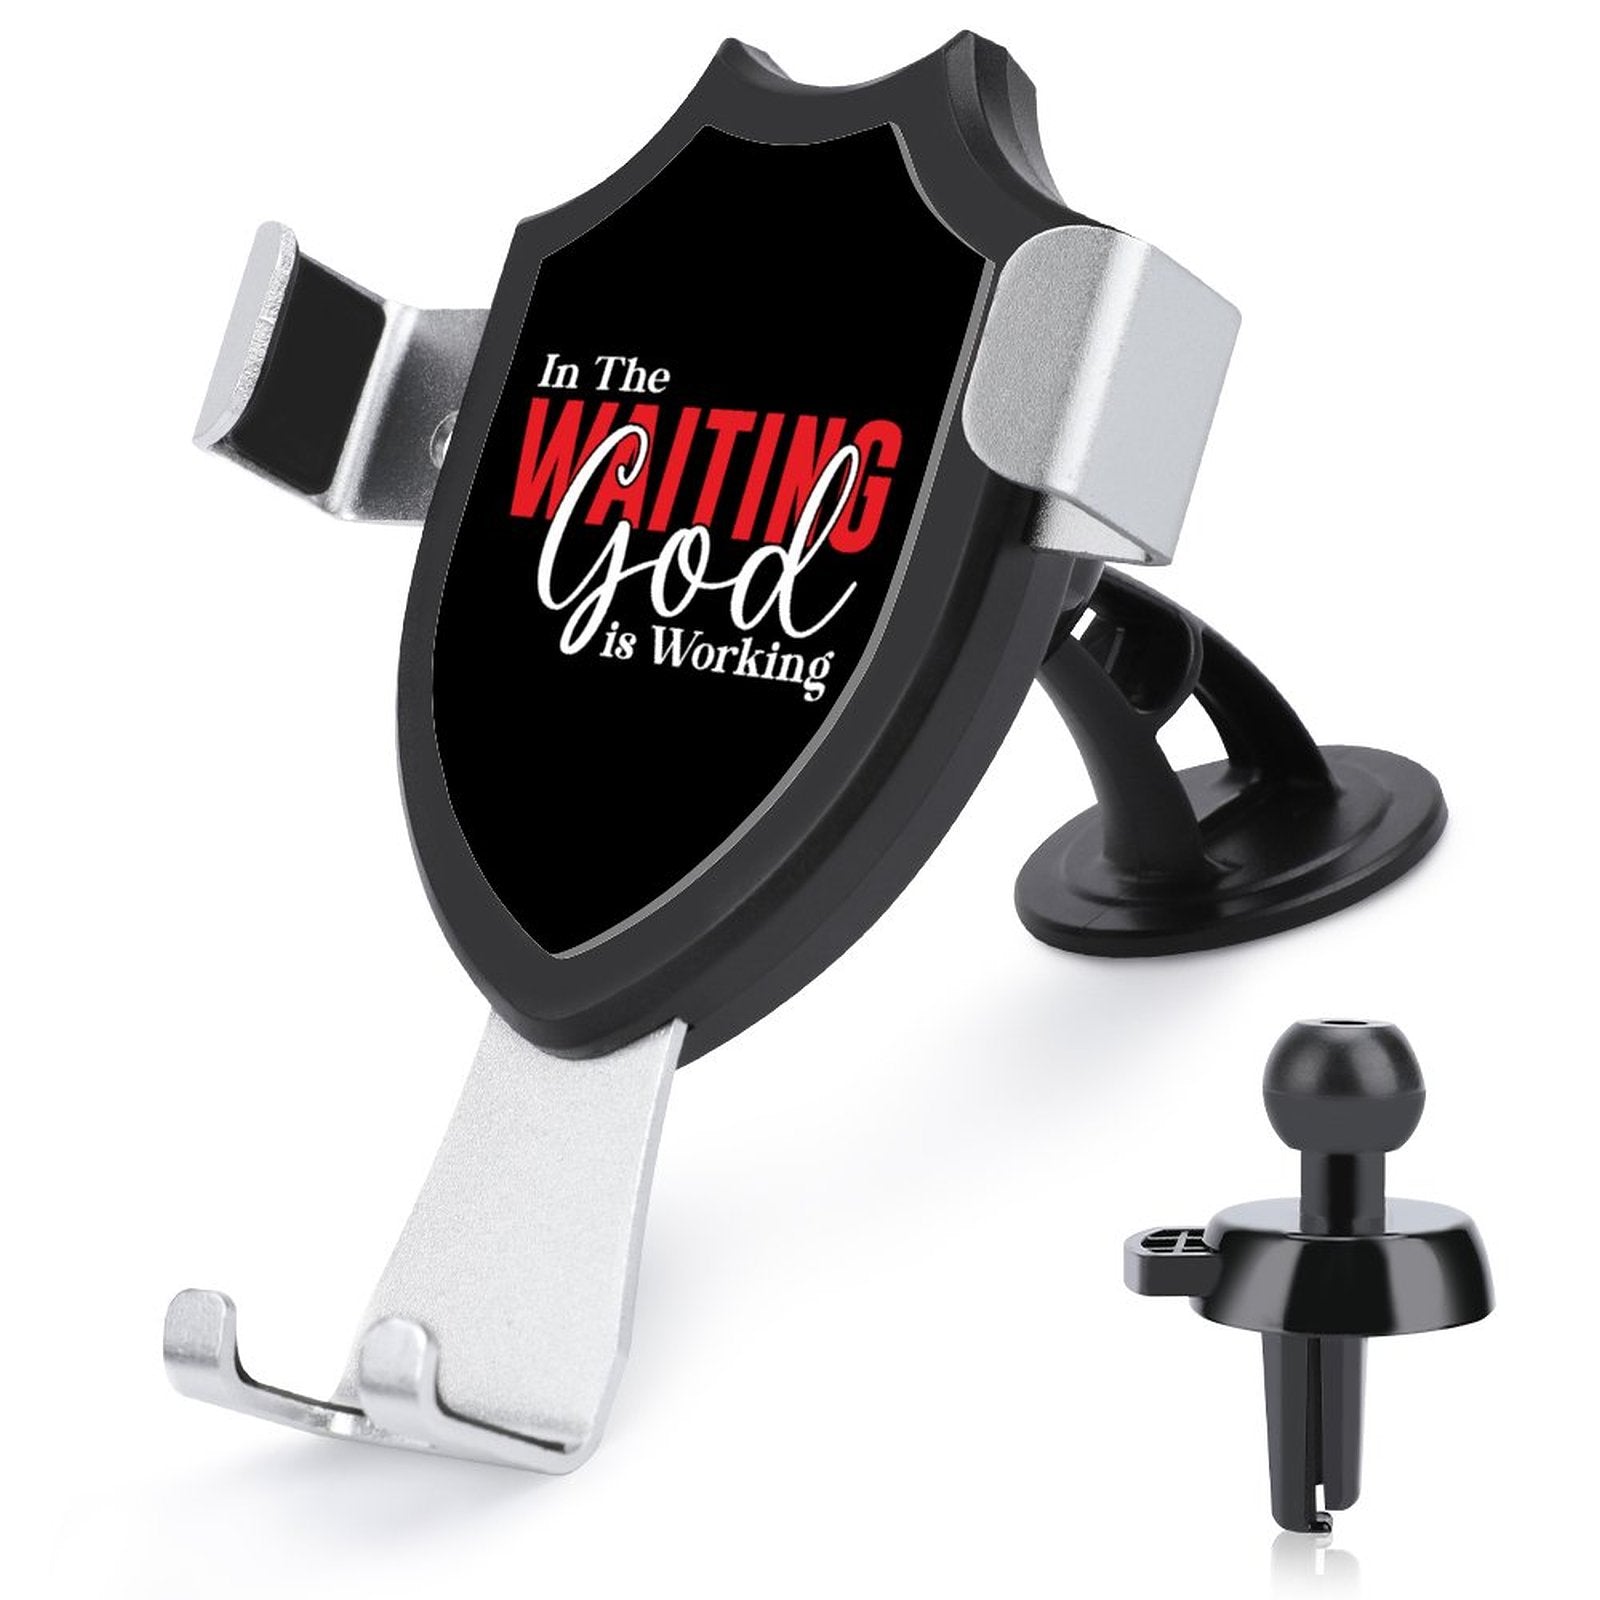 In The Waiting God Is Working Christian Car Mount Mobile Phone Holder SALE-Personal Design